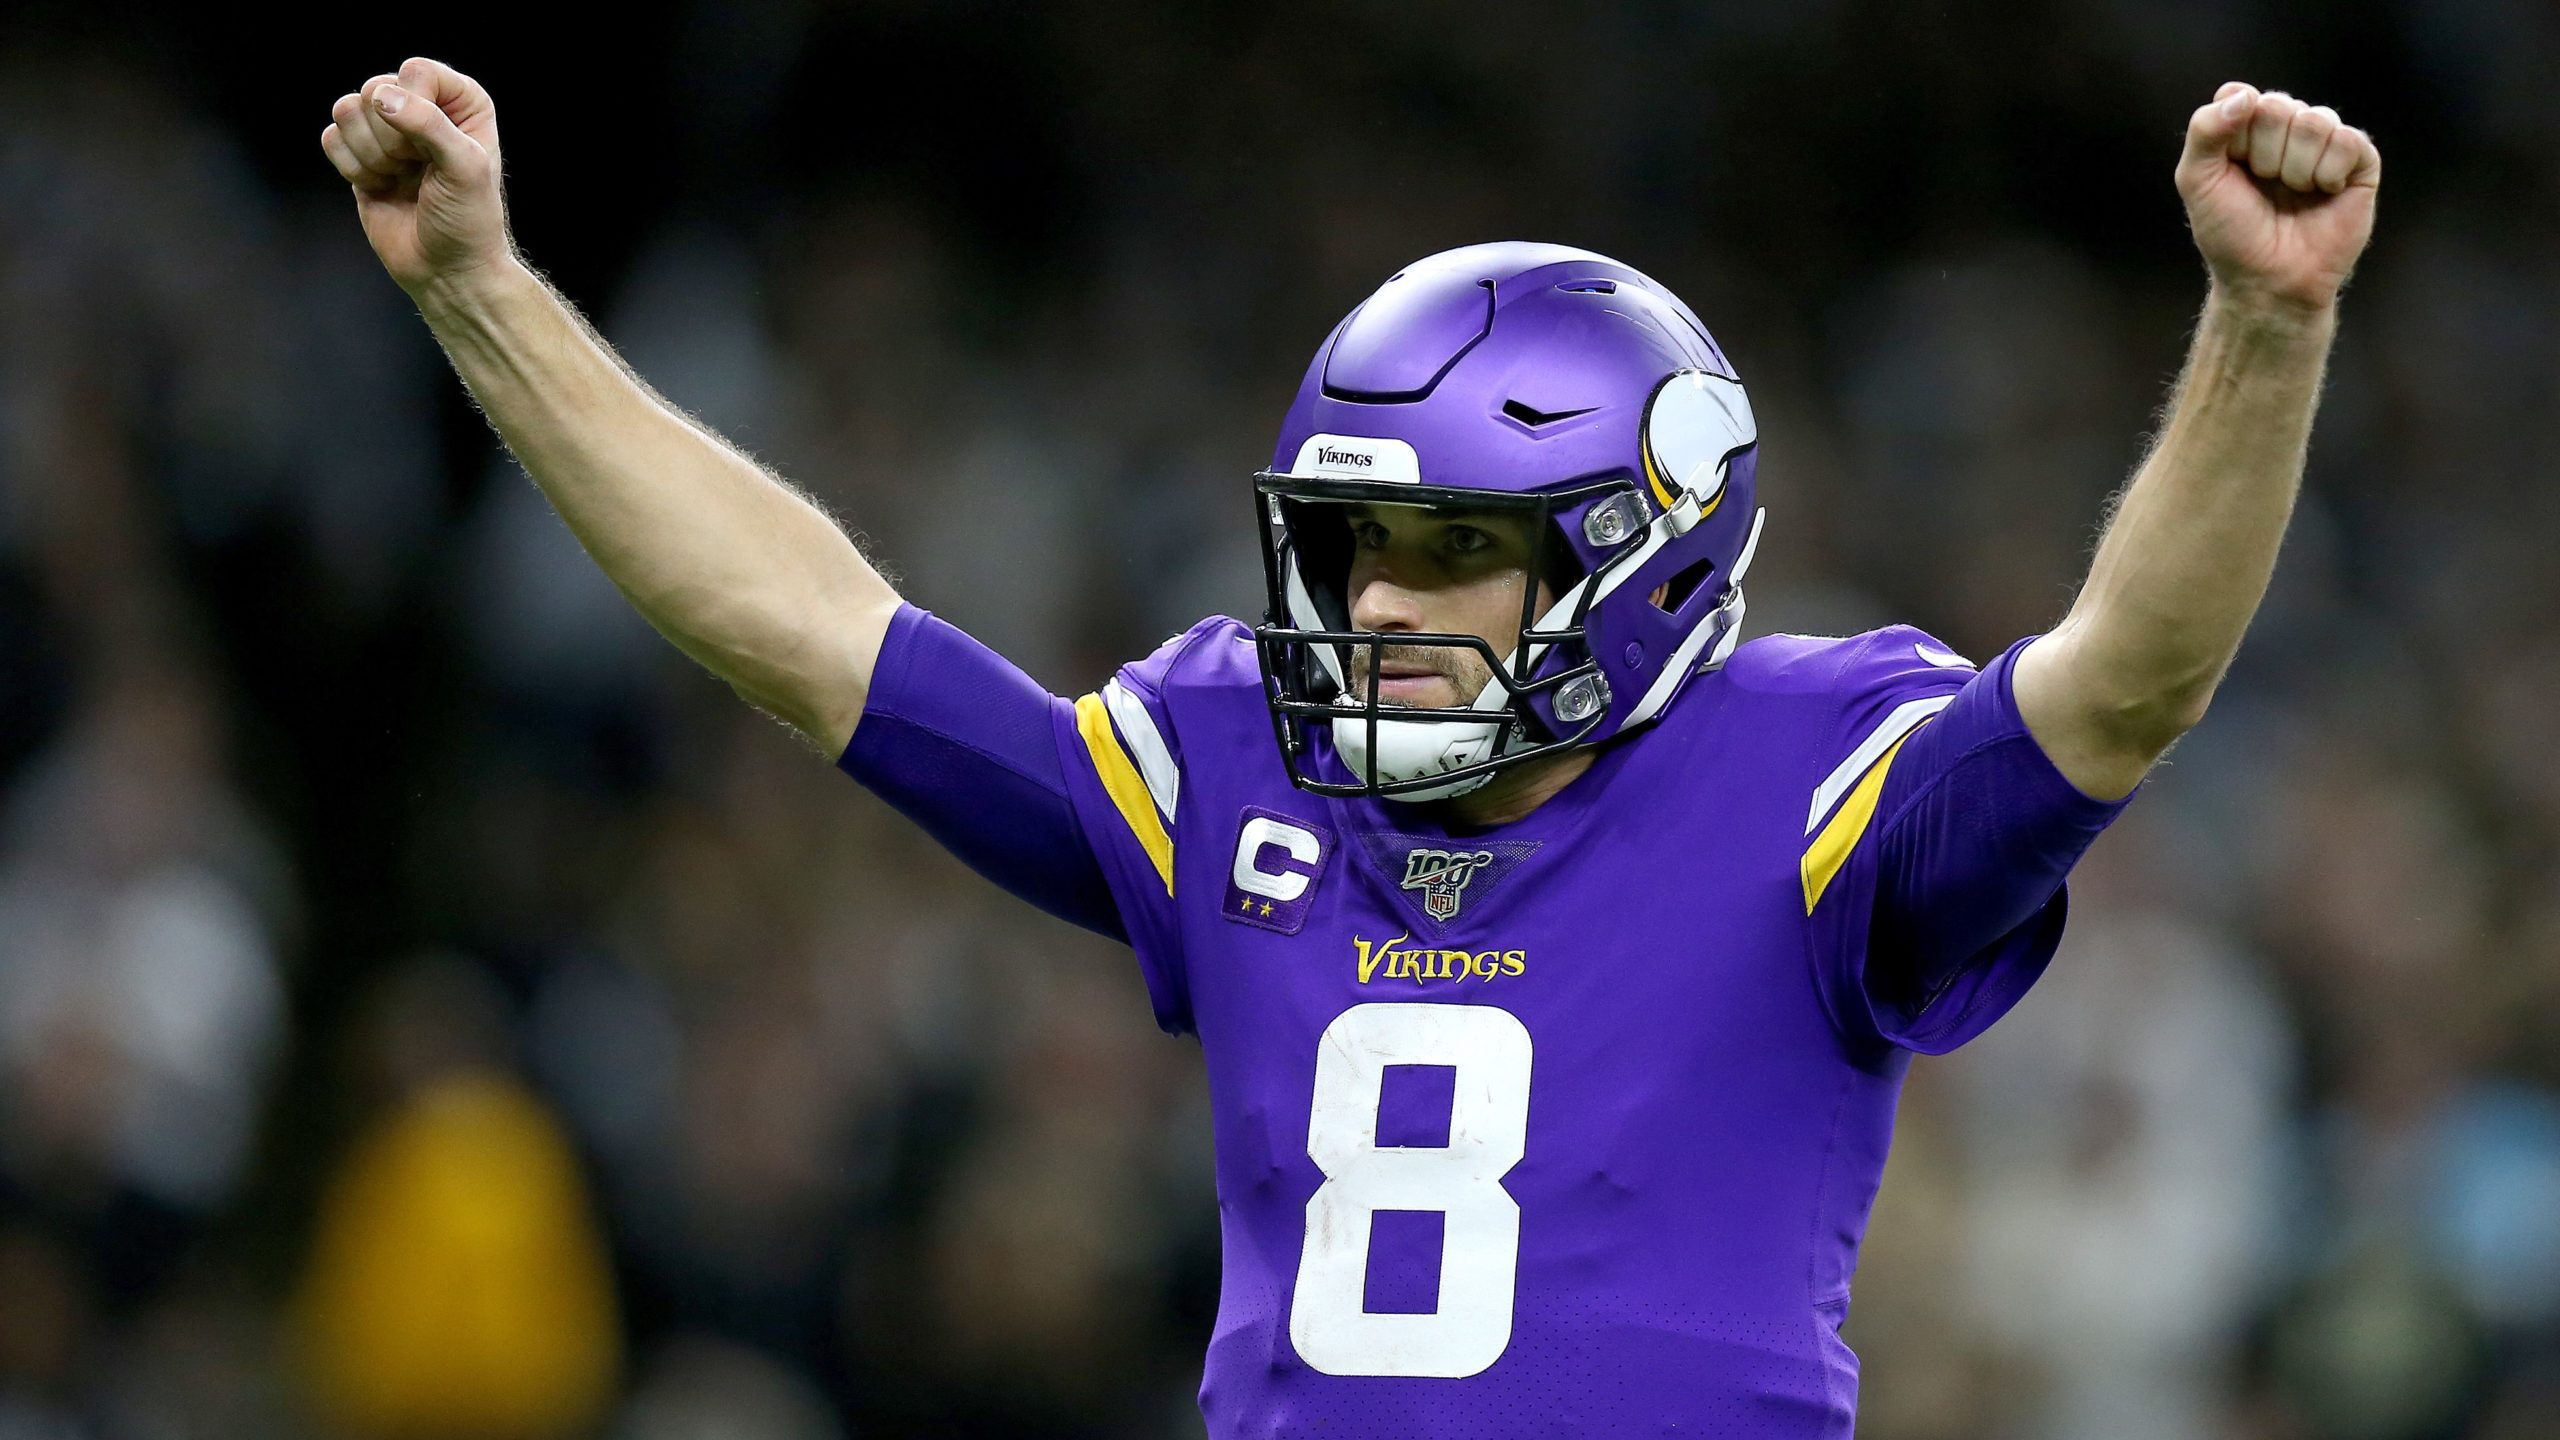 Former Vikings legend Jared Allen says it is time for the Vikings to move on from Kirk Cousins